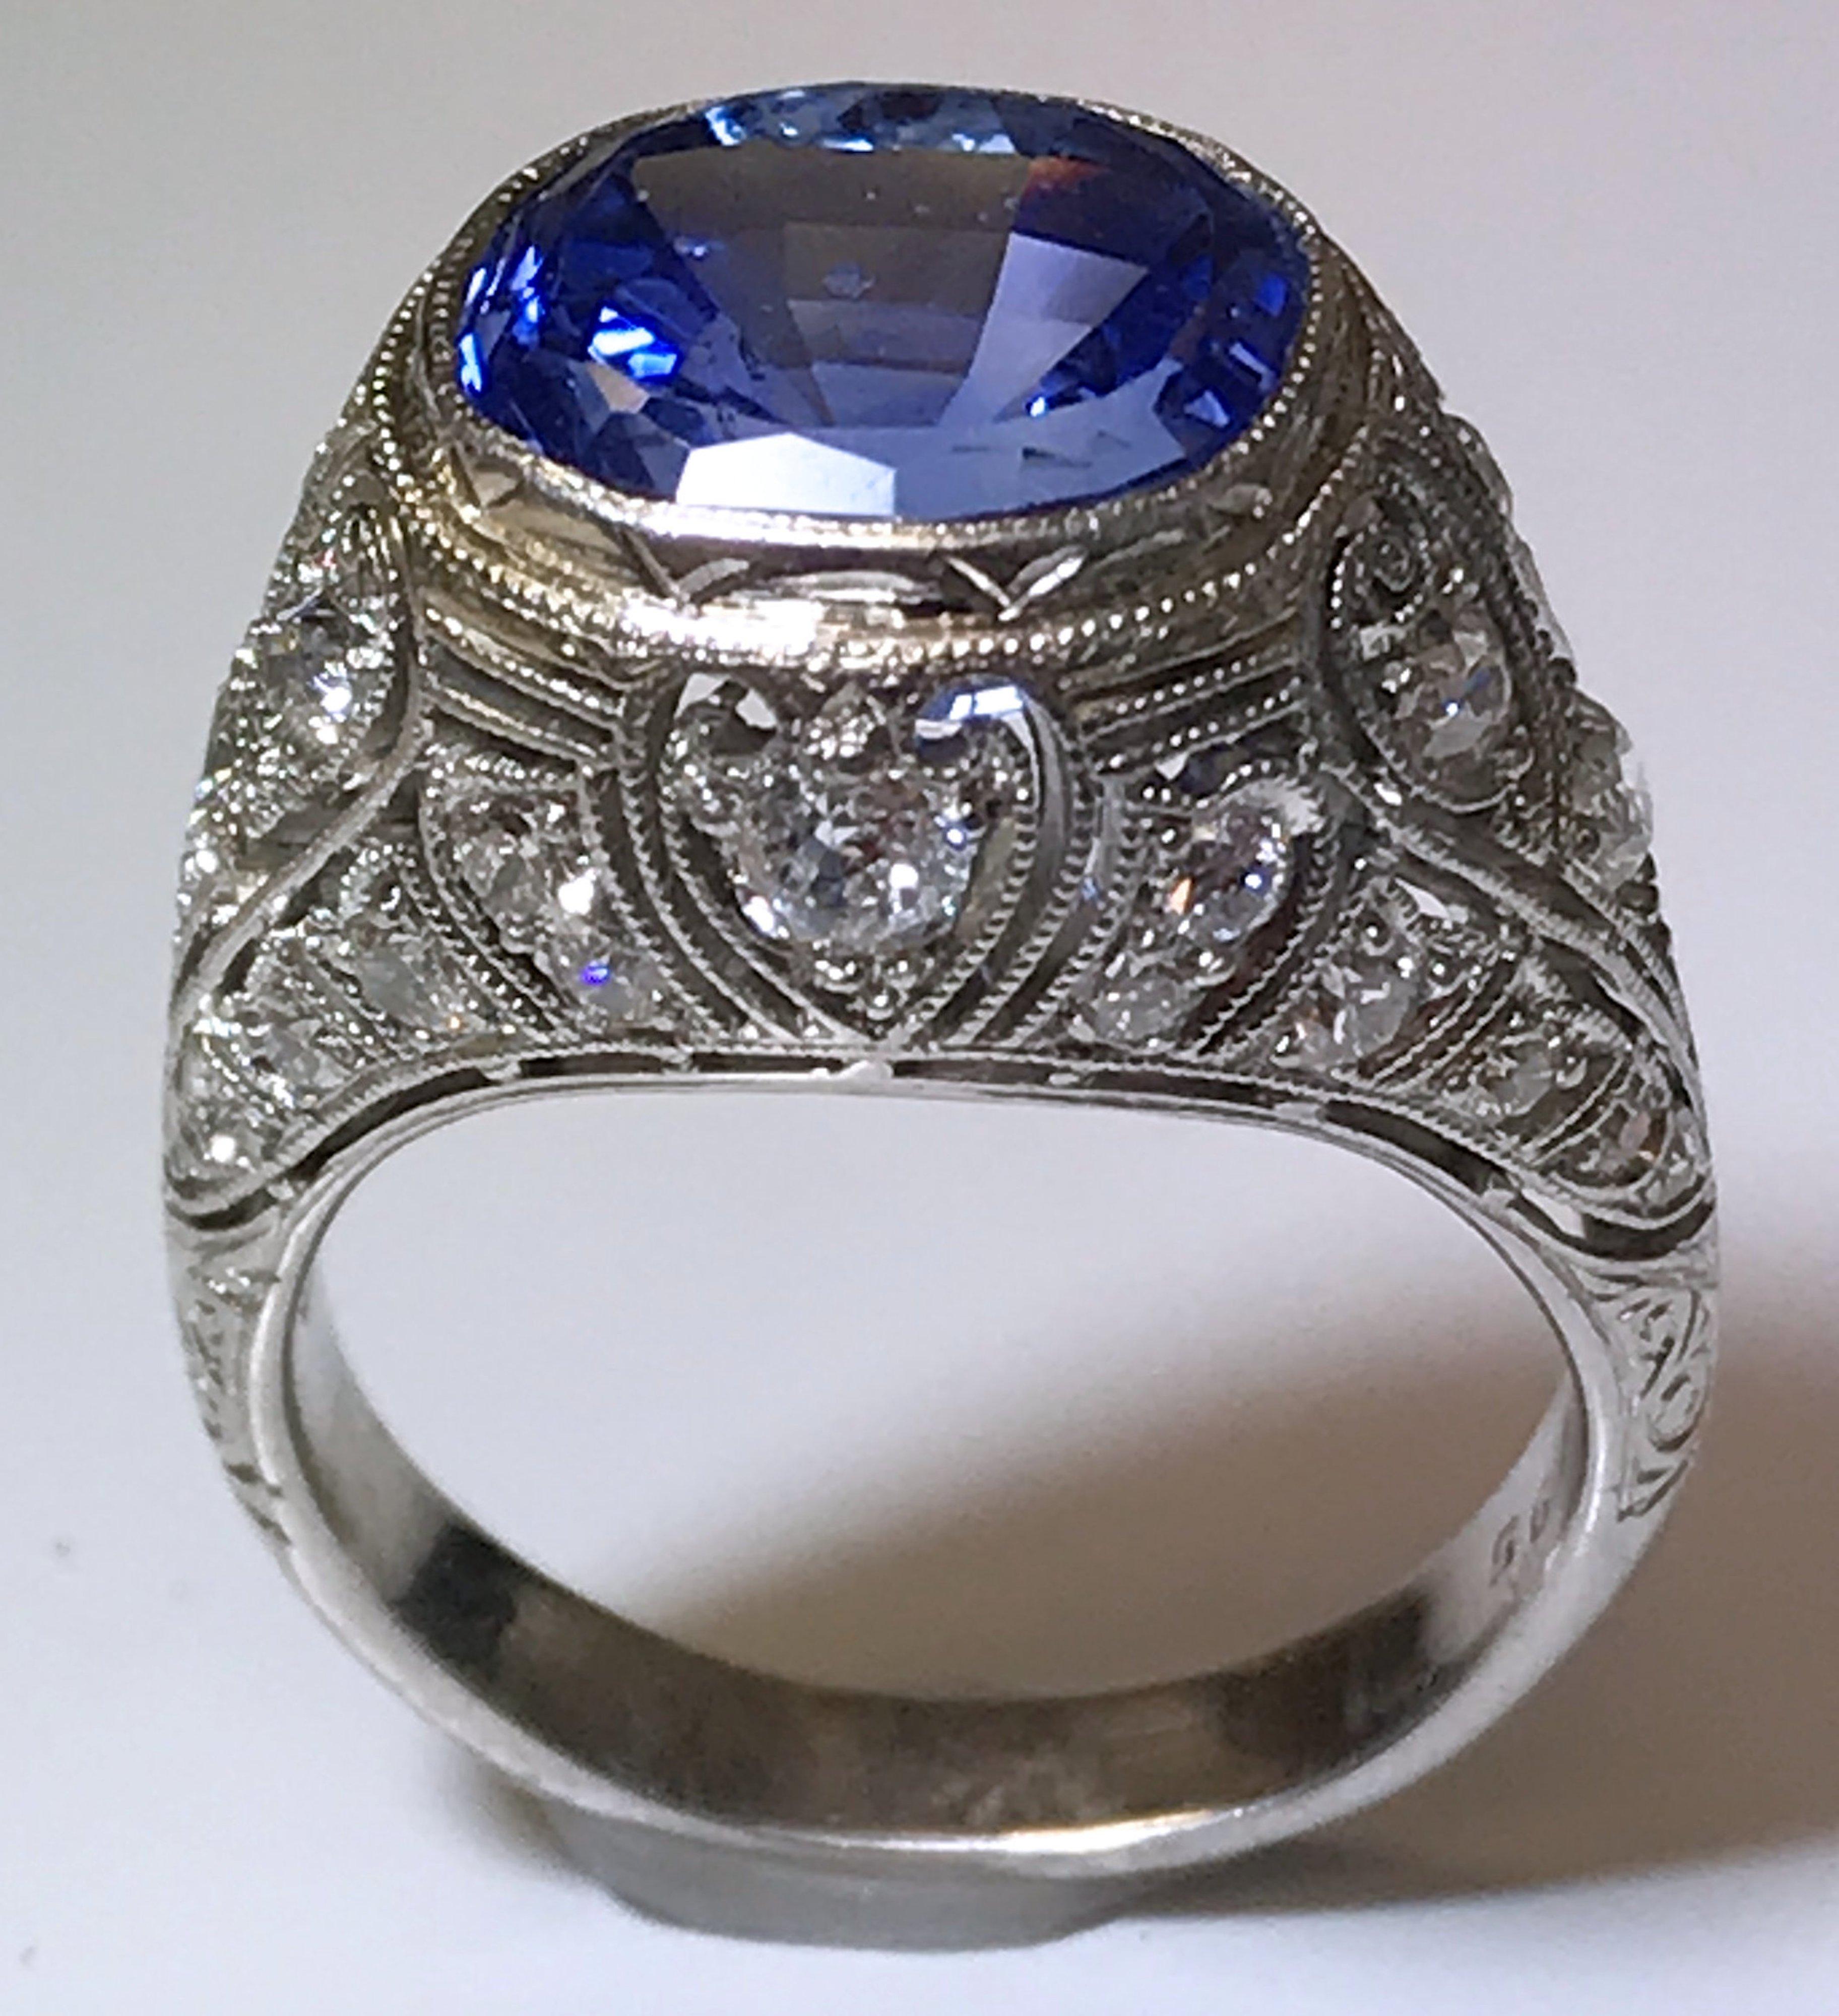 Vintage Platinum Art Deco Sapphire and Diamond Ring, Oval Modified Brilliant Cut Sapphire 5.30 Carat; GIA Certificate #6177762559; No Heat, Ceylon;  European and Single Cut Diamonds 0.75 Carat Total Weight, VS-SI, G-H. Finger Size 6.5; Style Number